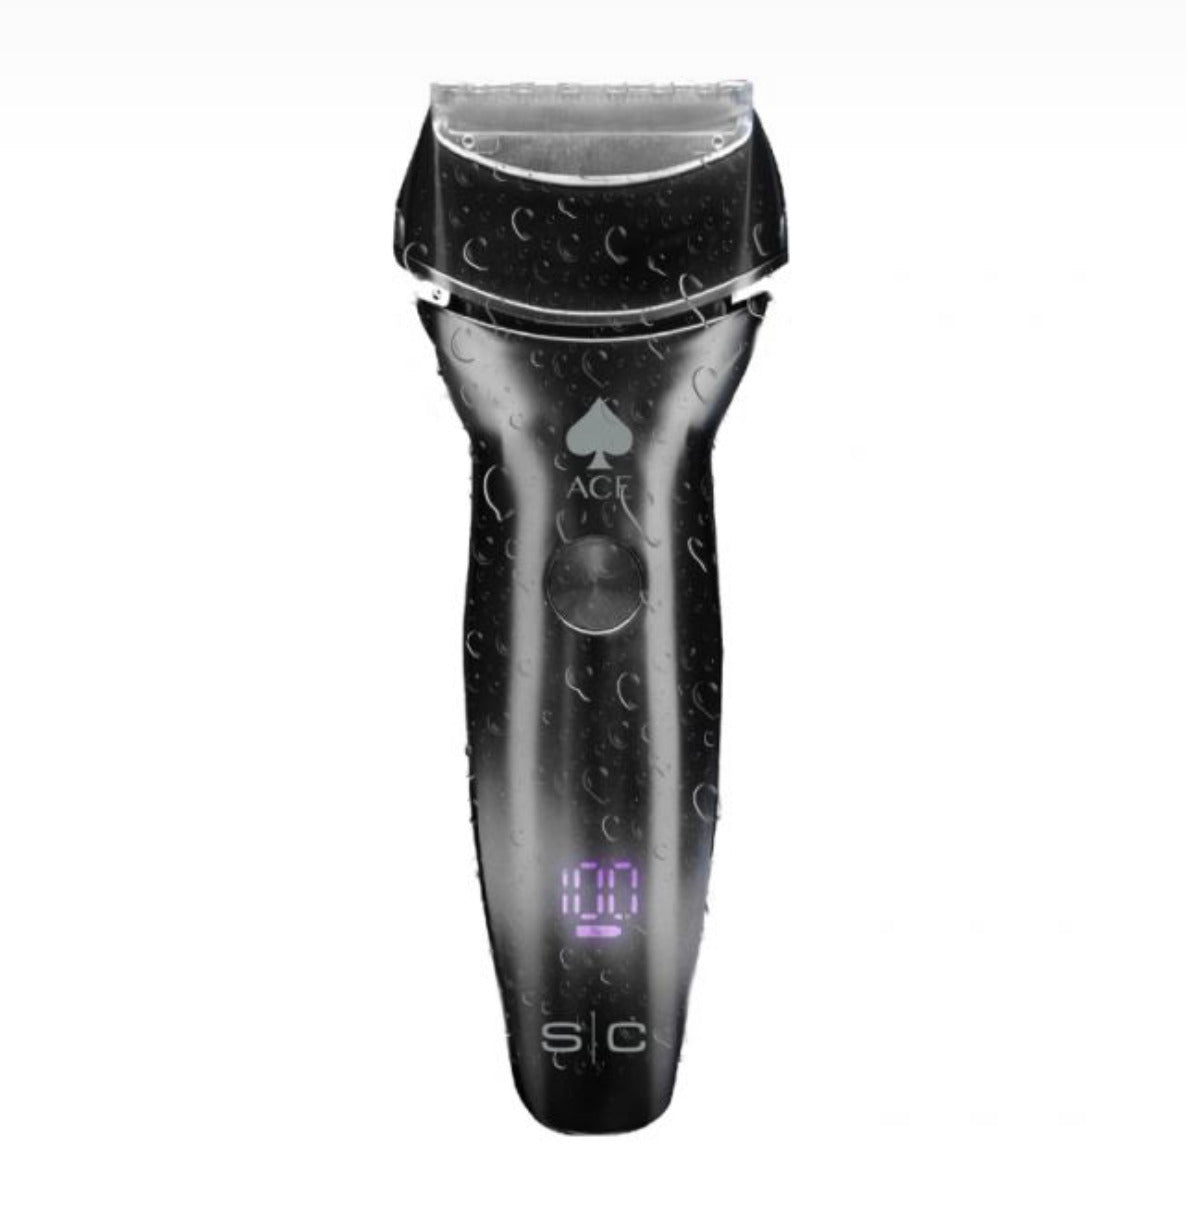 StyleCraft S|C ACE electric shaver with precision trimmer – waterproof & Li battery